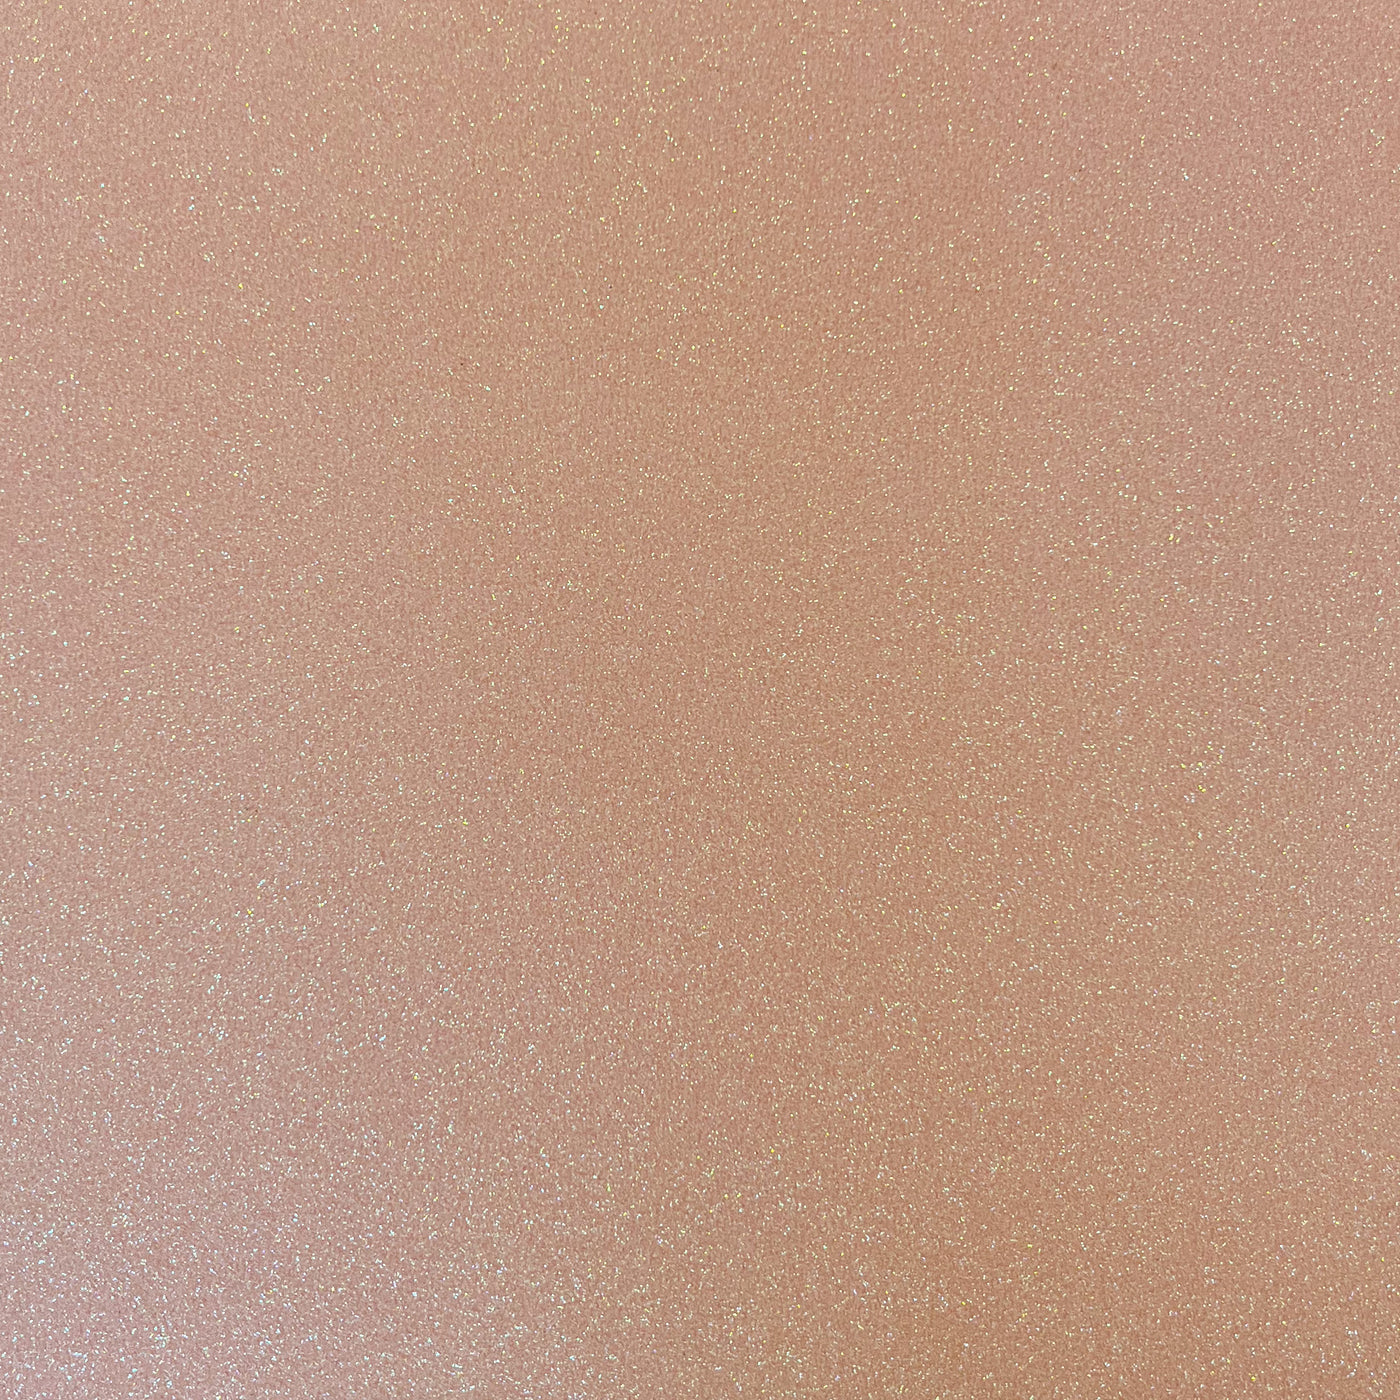 Frosted Peach Glitter Luxe Glitter Cardstock